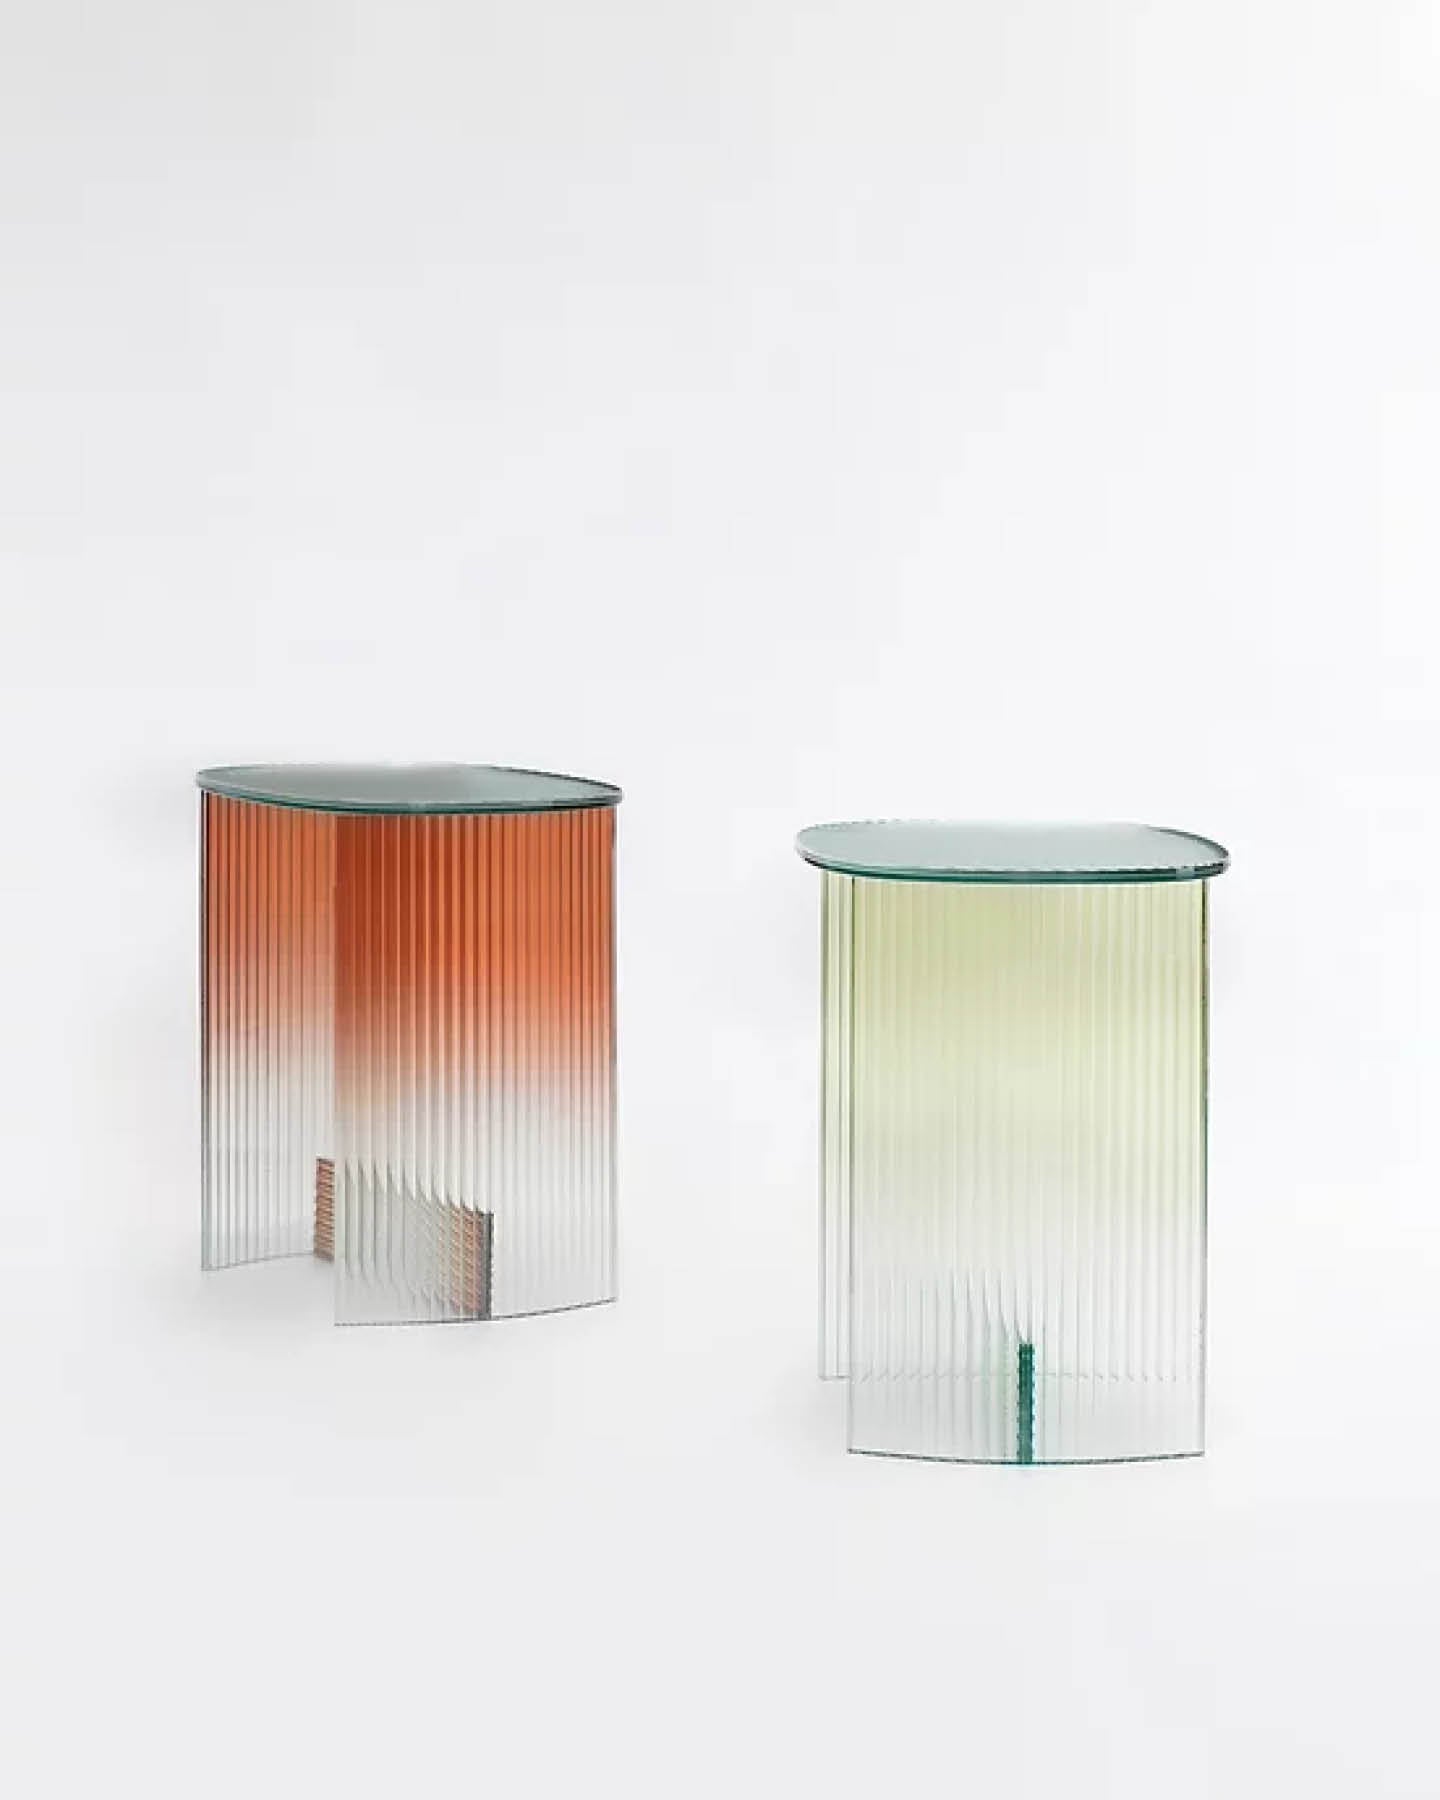 Fluted Glass Table, By Thinkk Studio